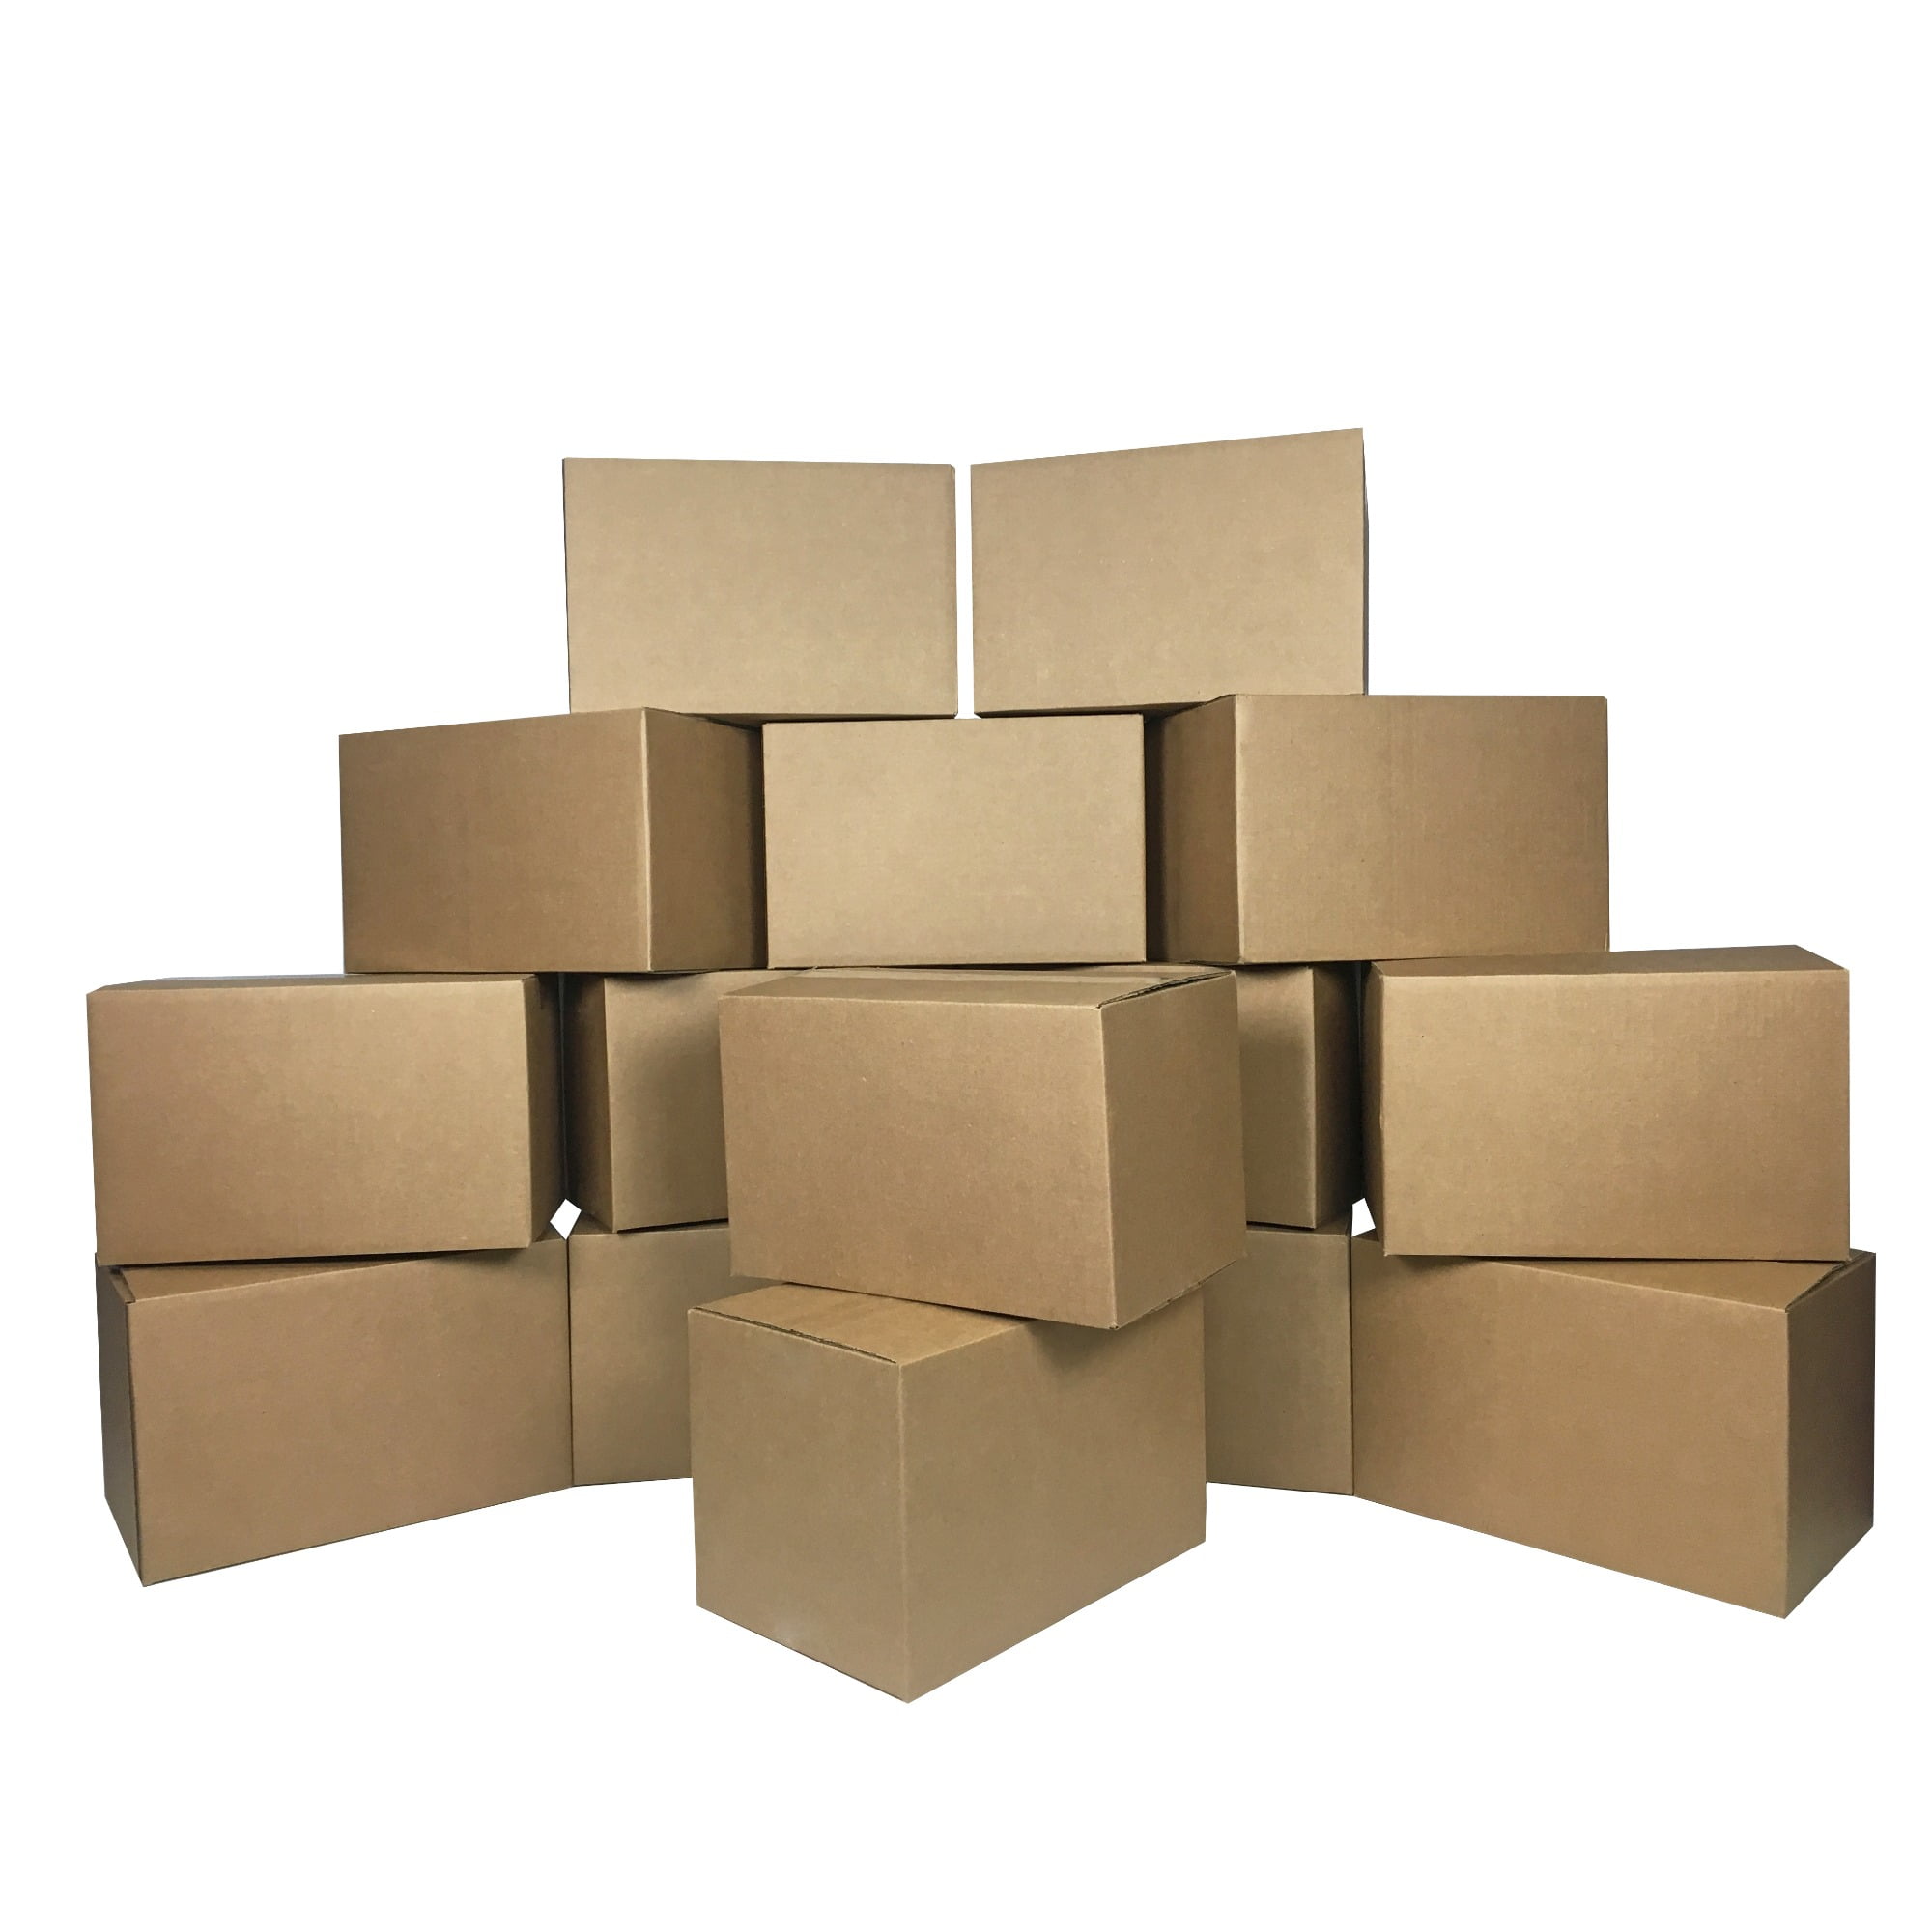 15 Small Moving Boxes - 16x10x10 - Cardboard Box Packing Shipping